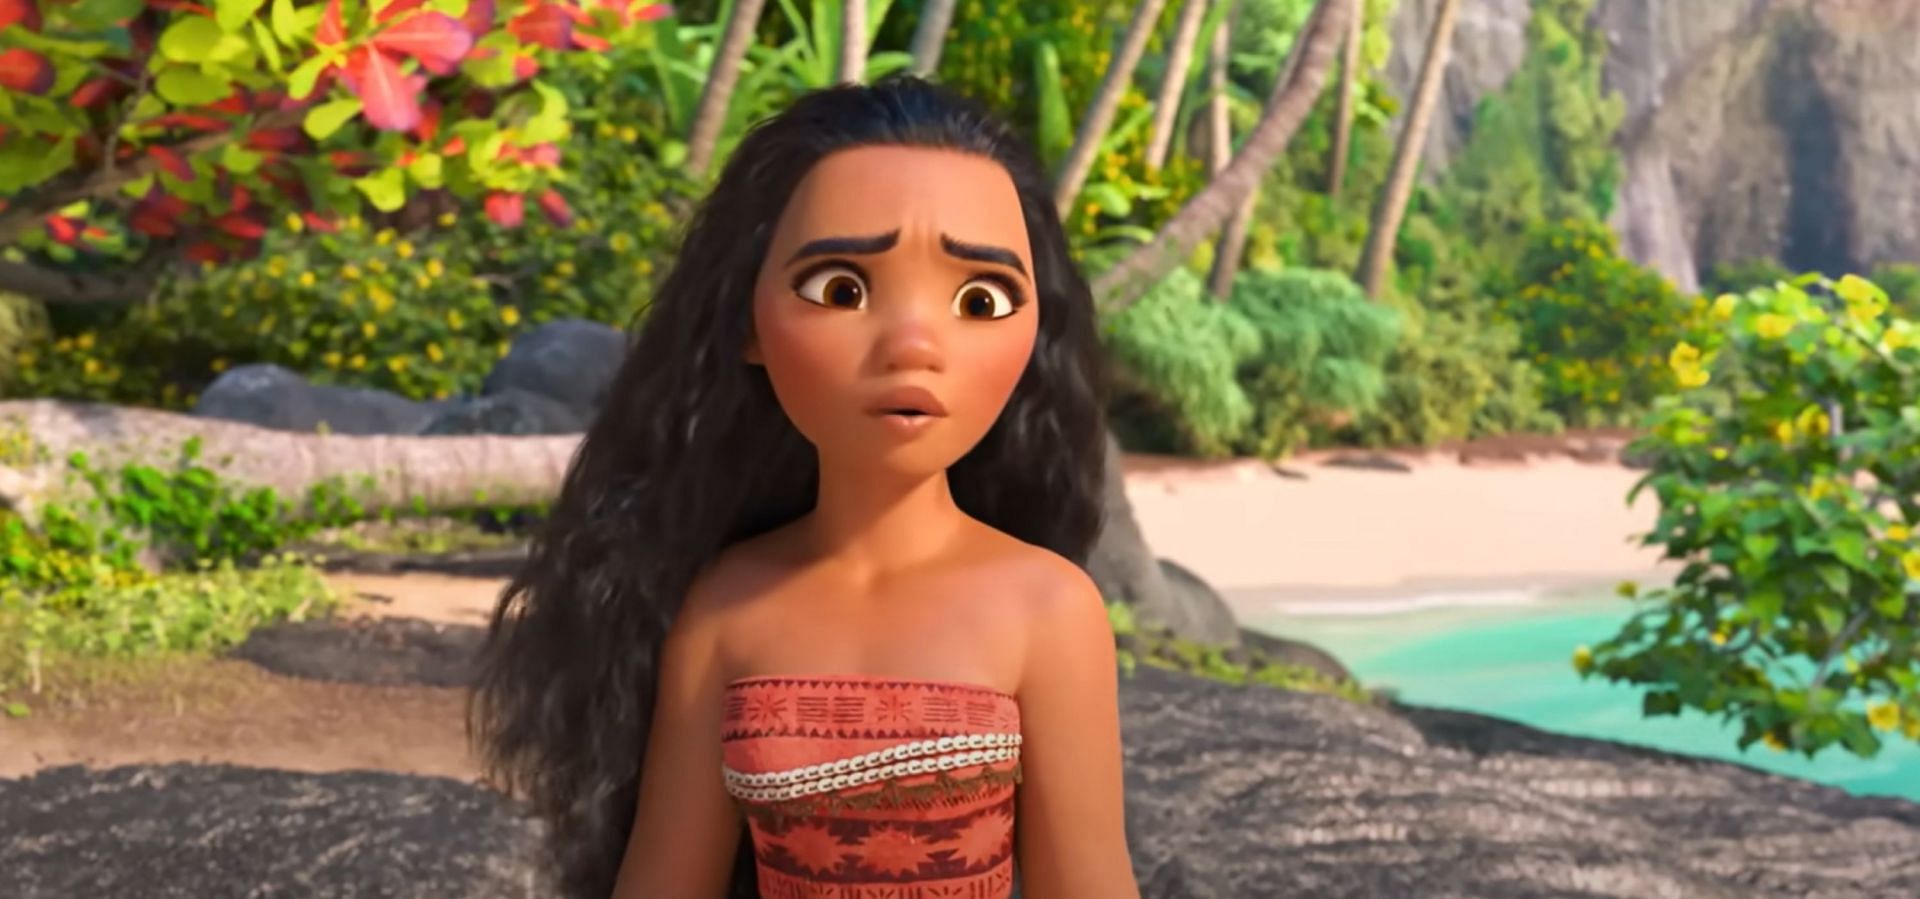 Claims of Moana being Disney